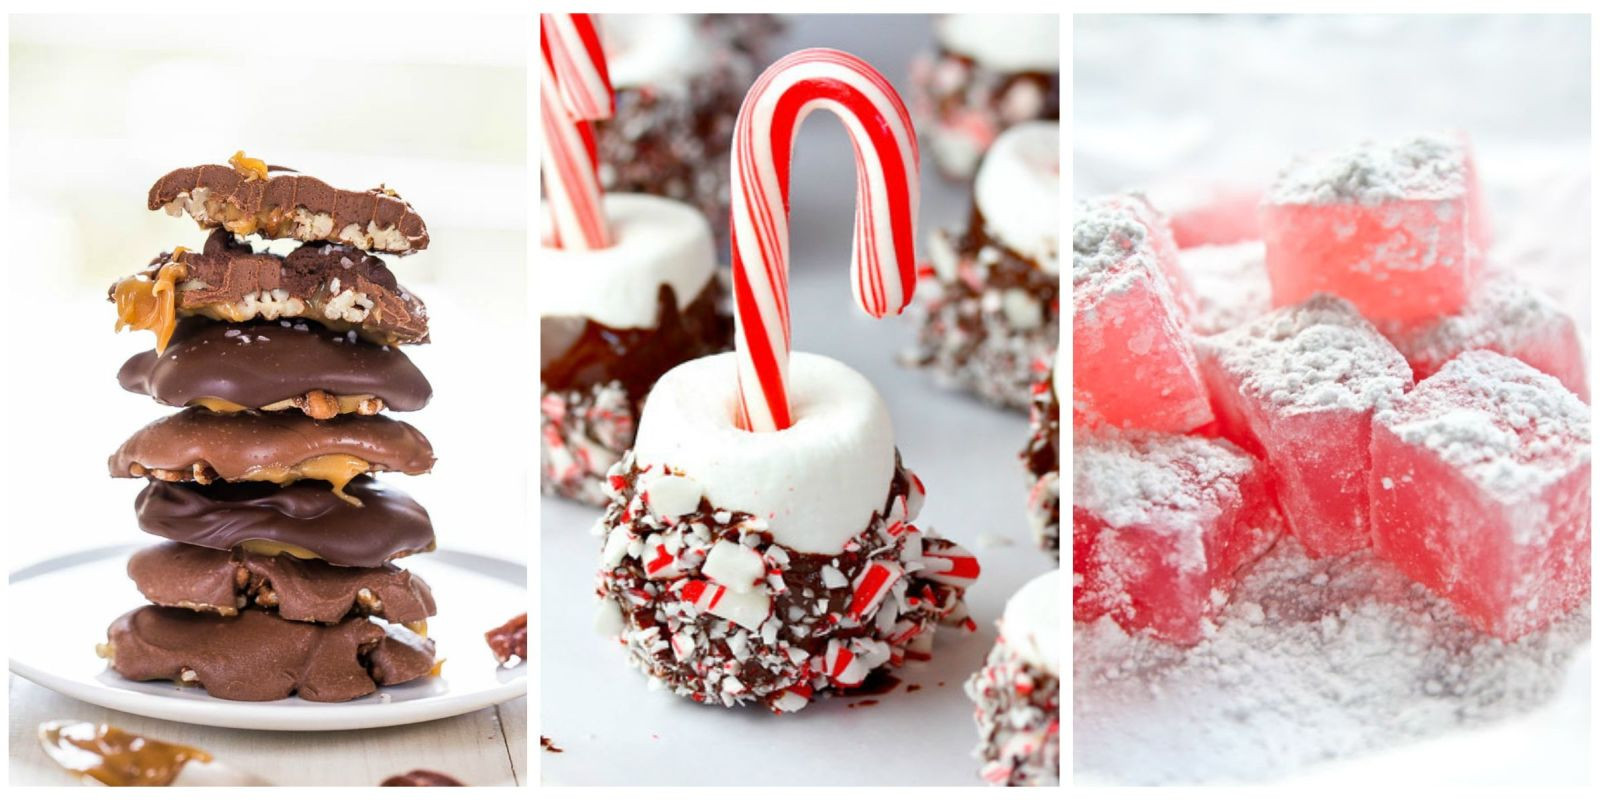 Christmas Candy Recipes For Gifts
 25 Easy Christmas Candy Recipes Ideas for Homemade